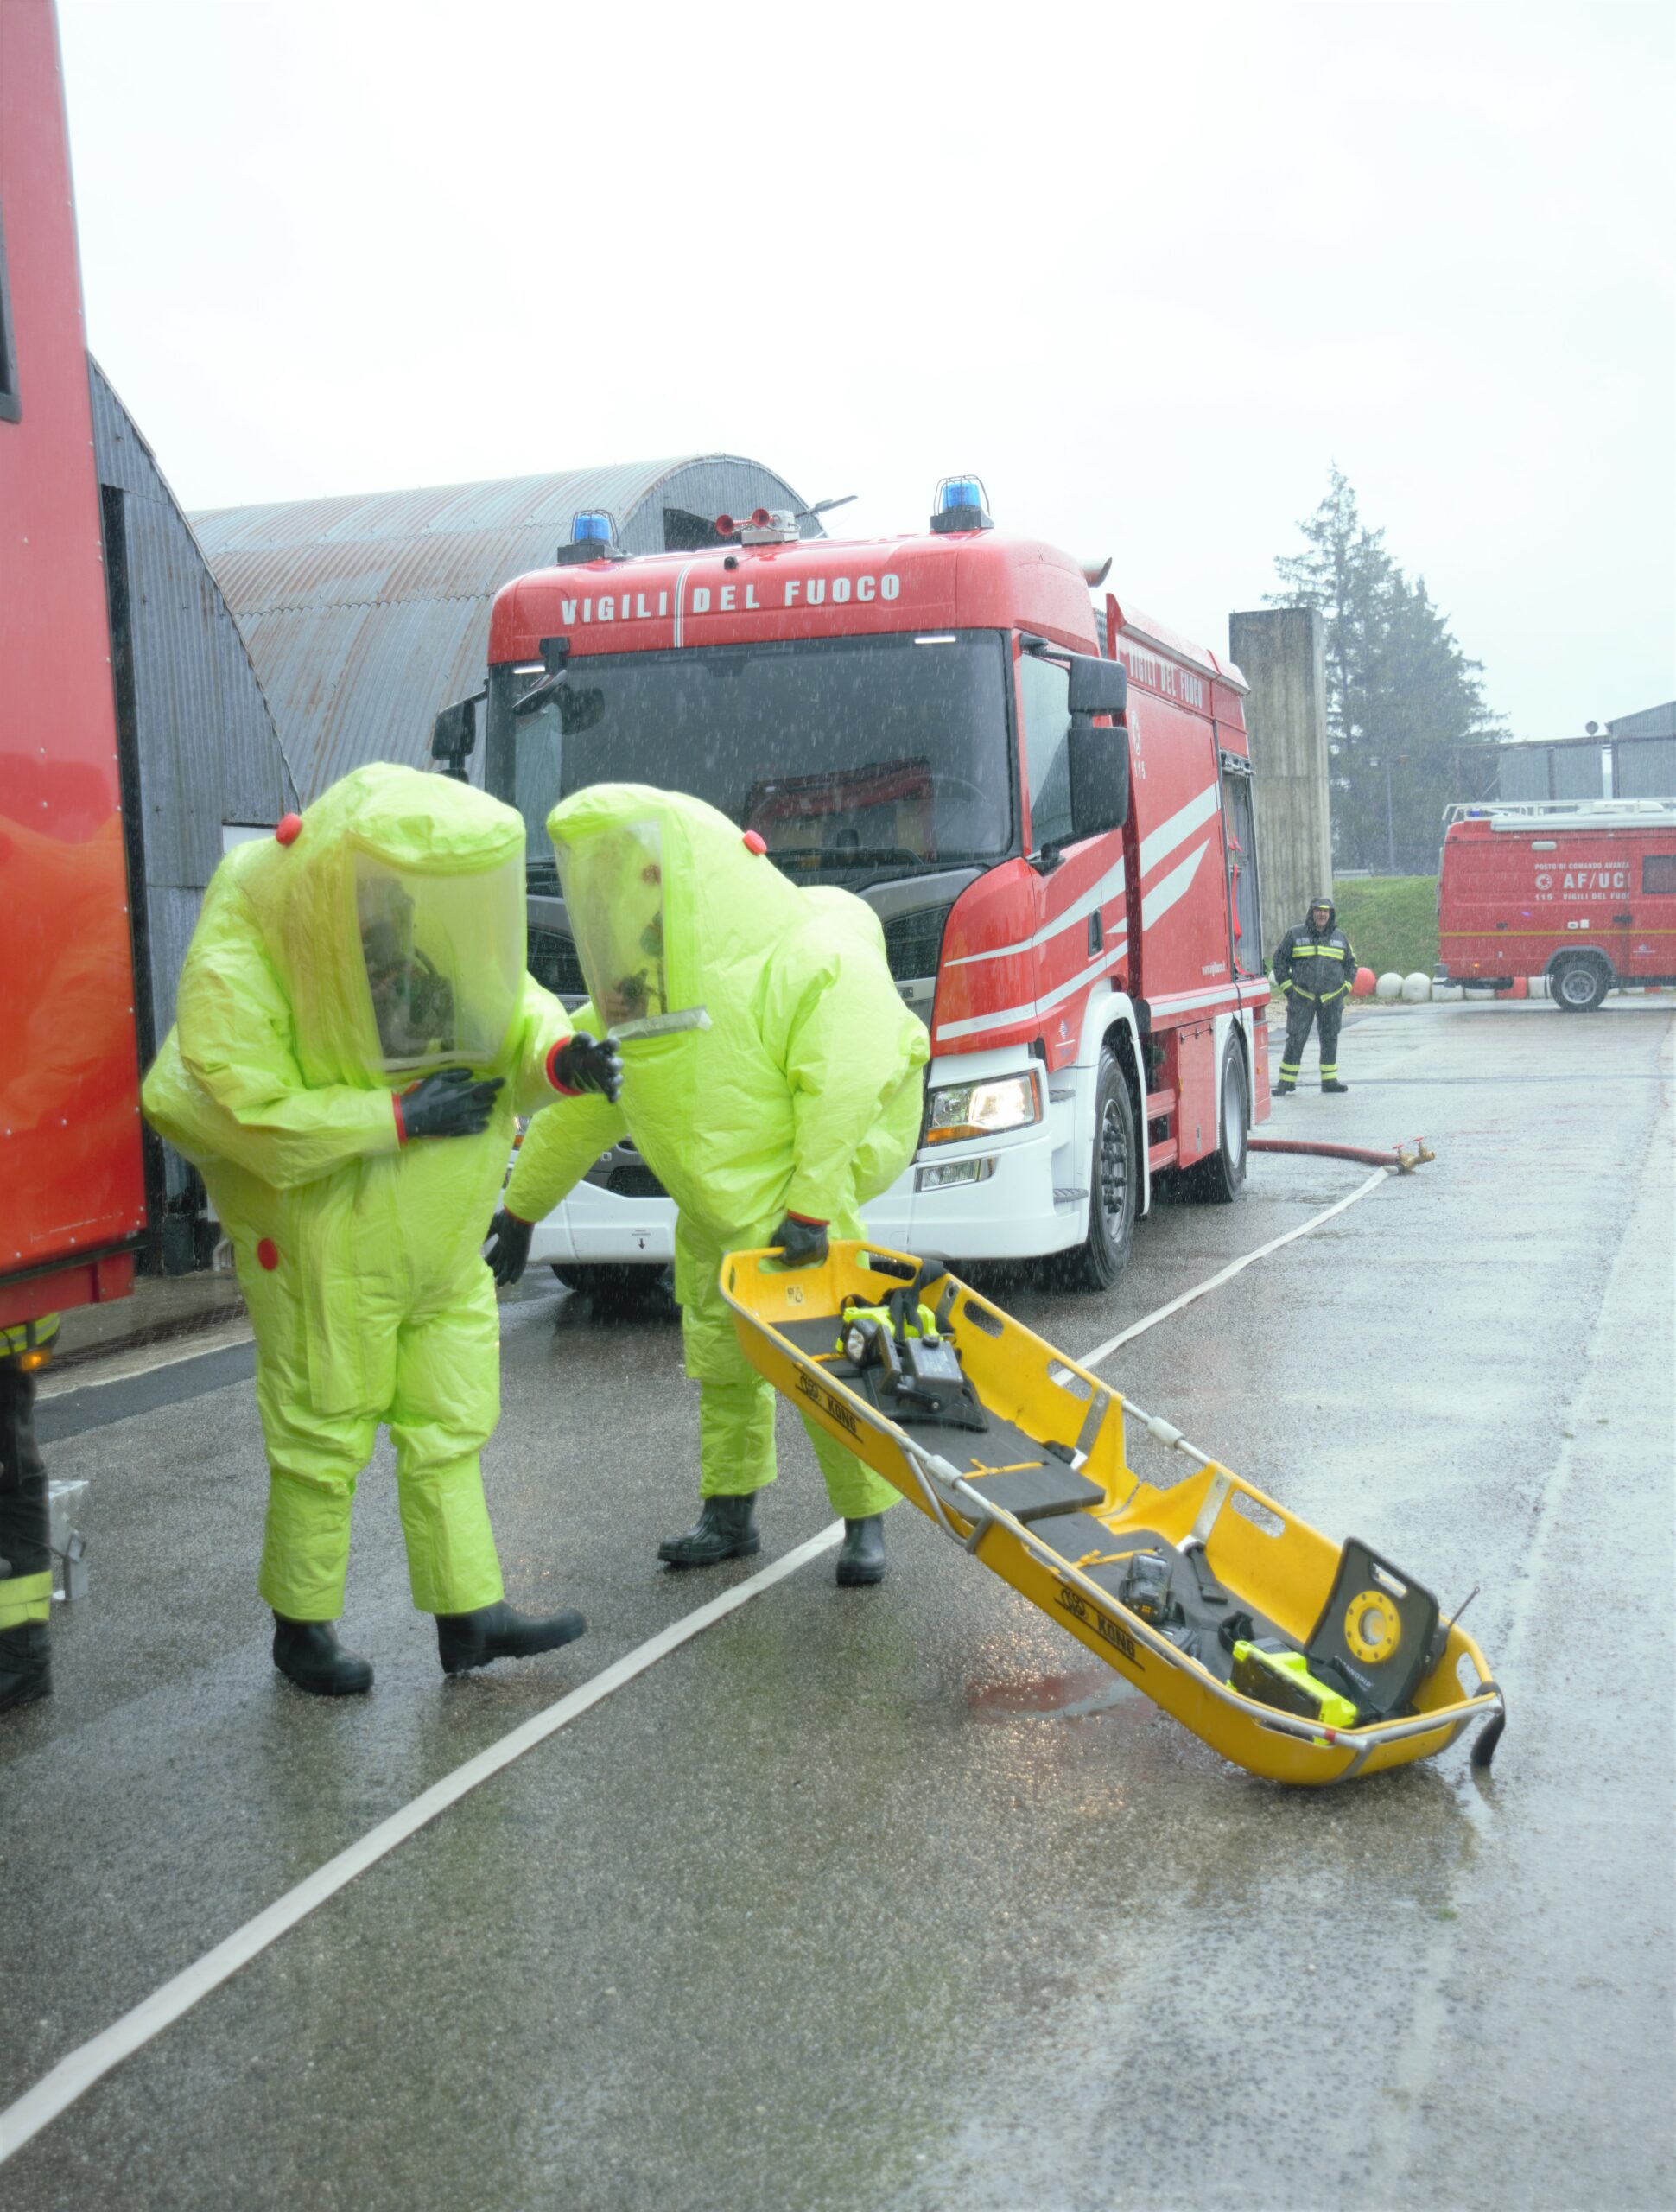 Two persons in a hazmat suit discussing between each other. One of them is holding a yellow bench. Fire trucks can be seen in the background.